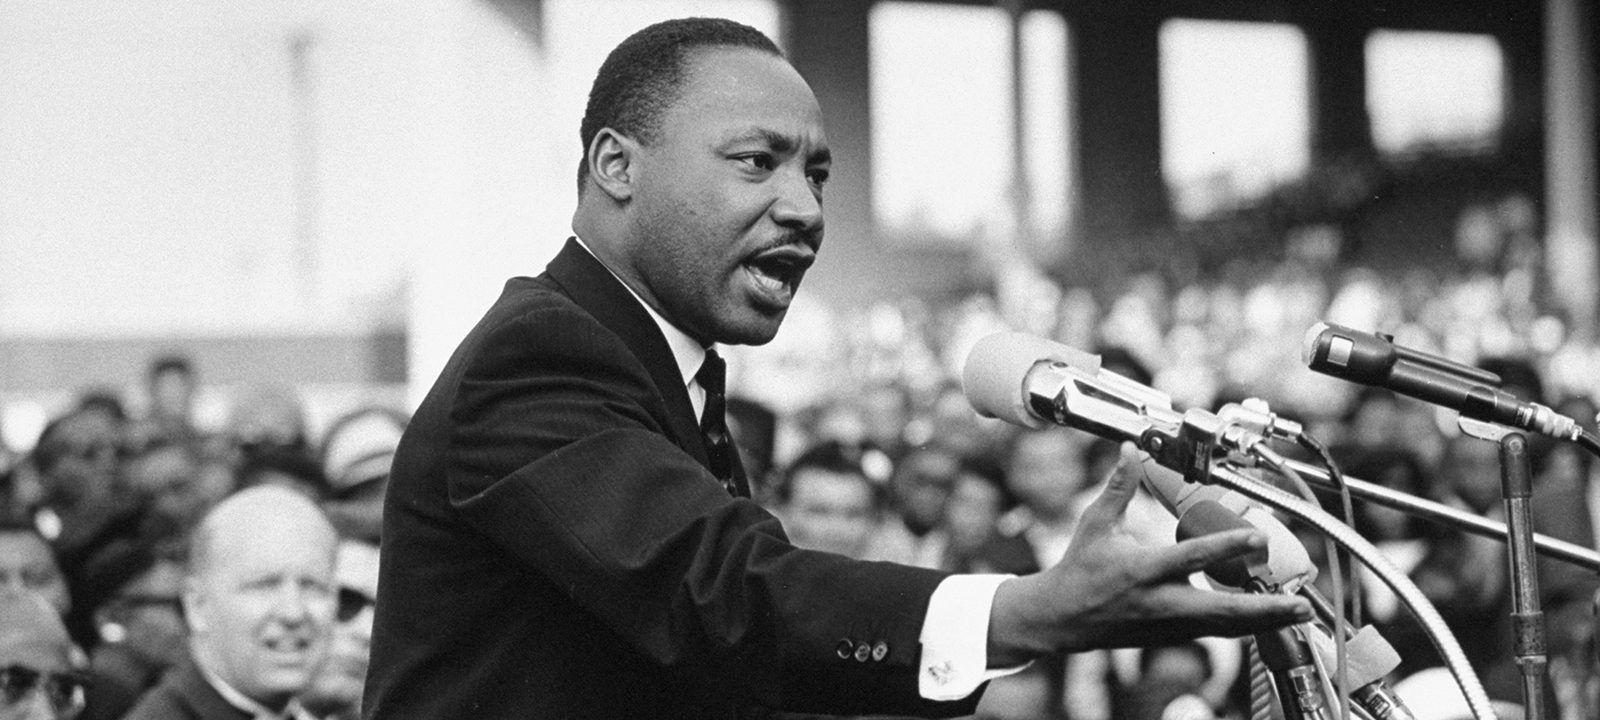 UAFS events honoring Dr. Martin Luther King Jr., slated for January